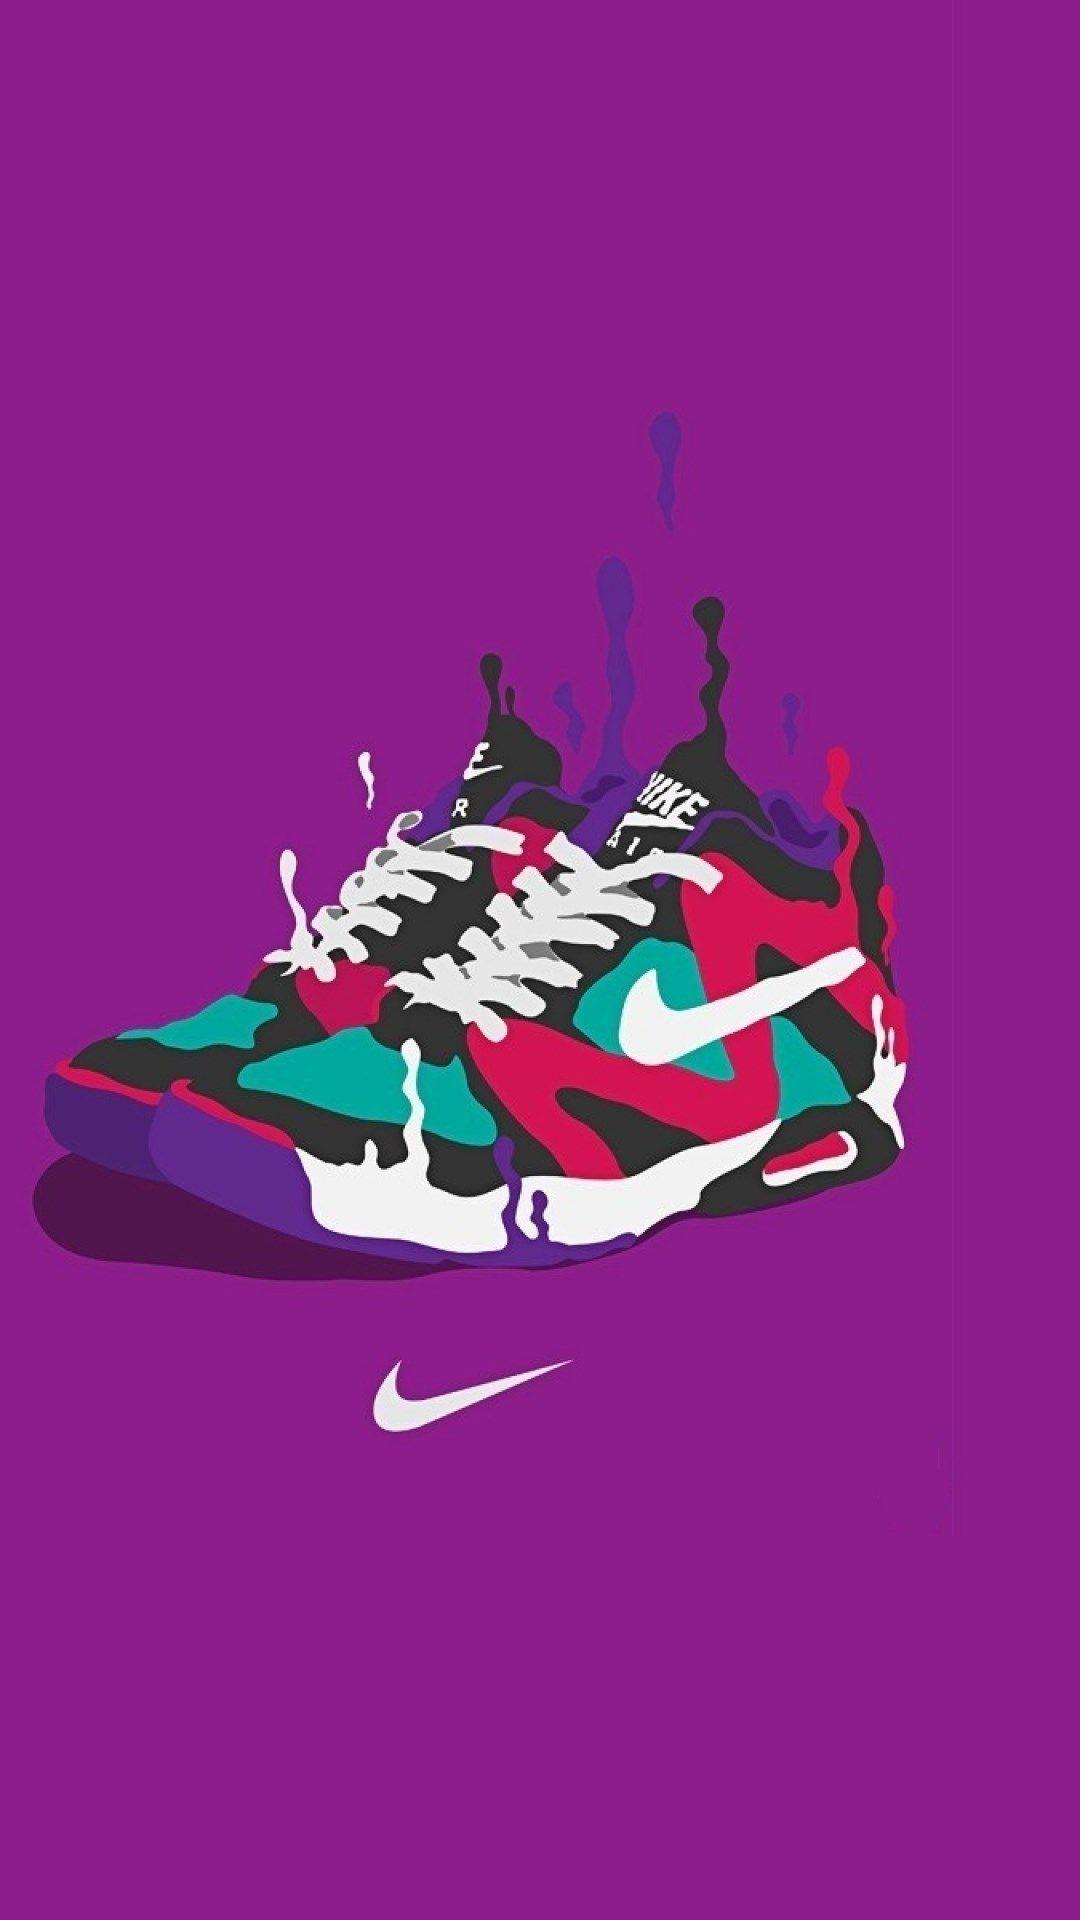 nike shoes wallpaper for iphone. Shoes wallpaper, Sneakers wallpaper